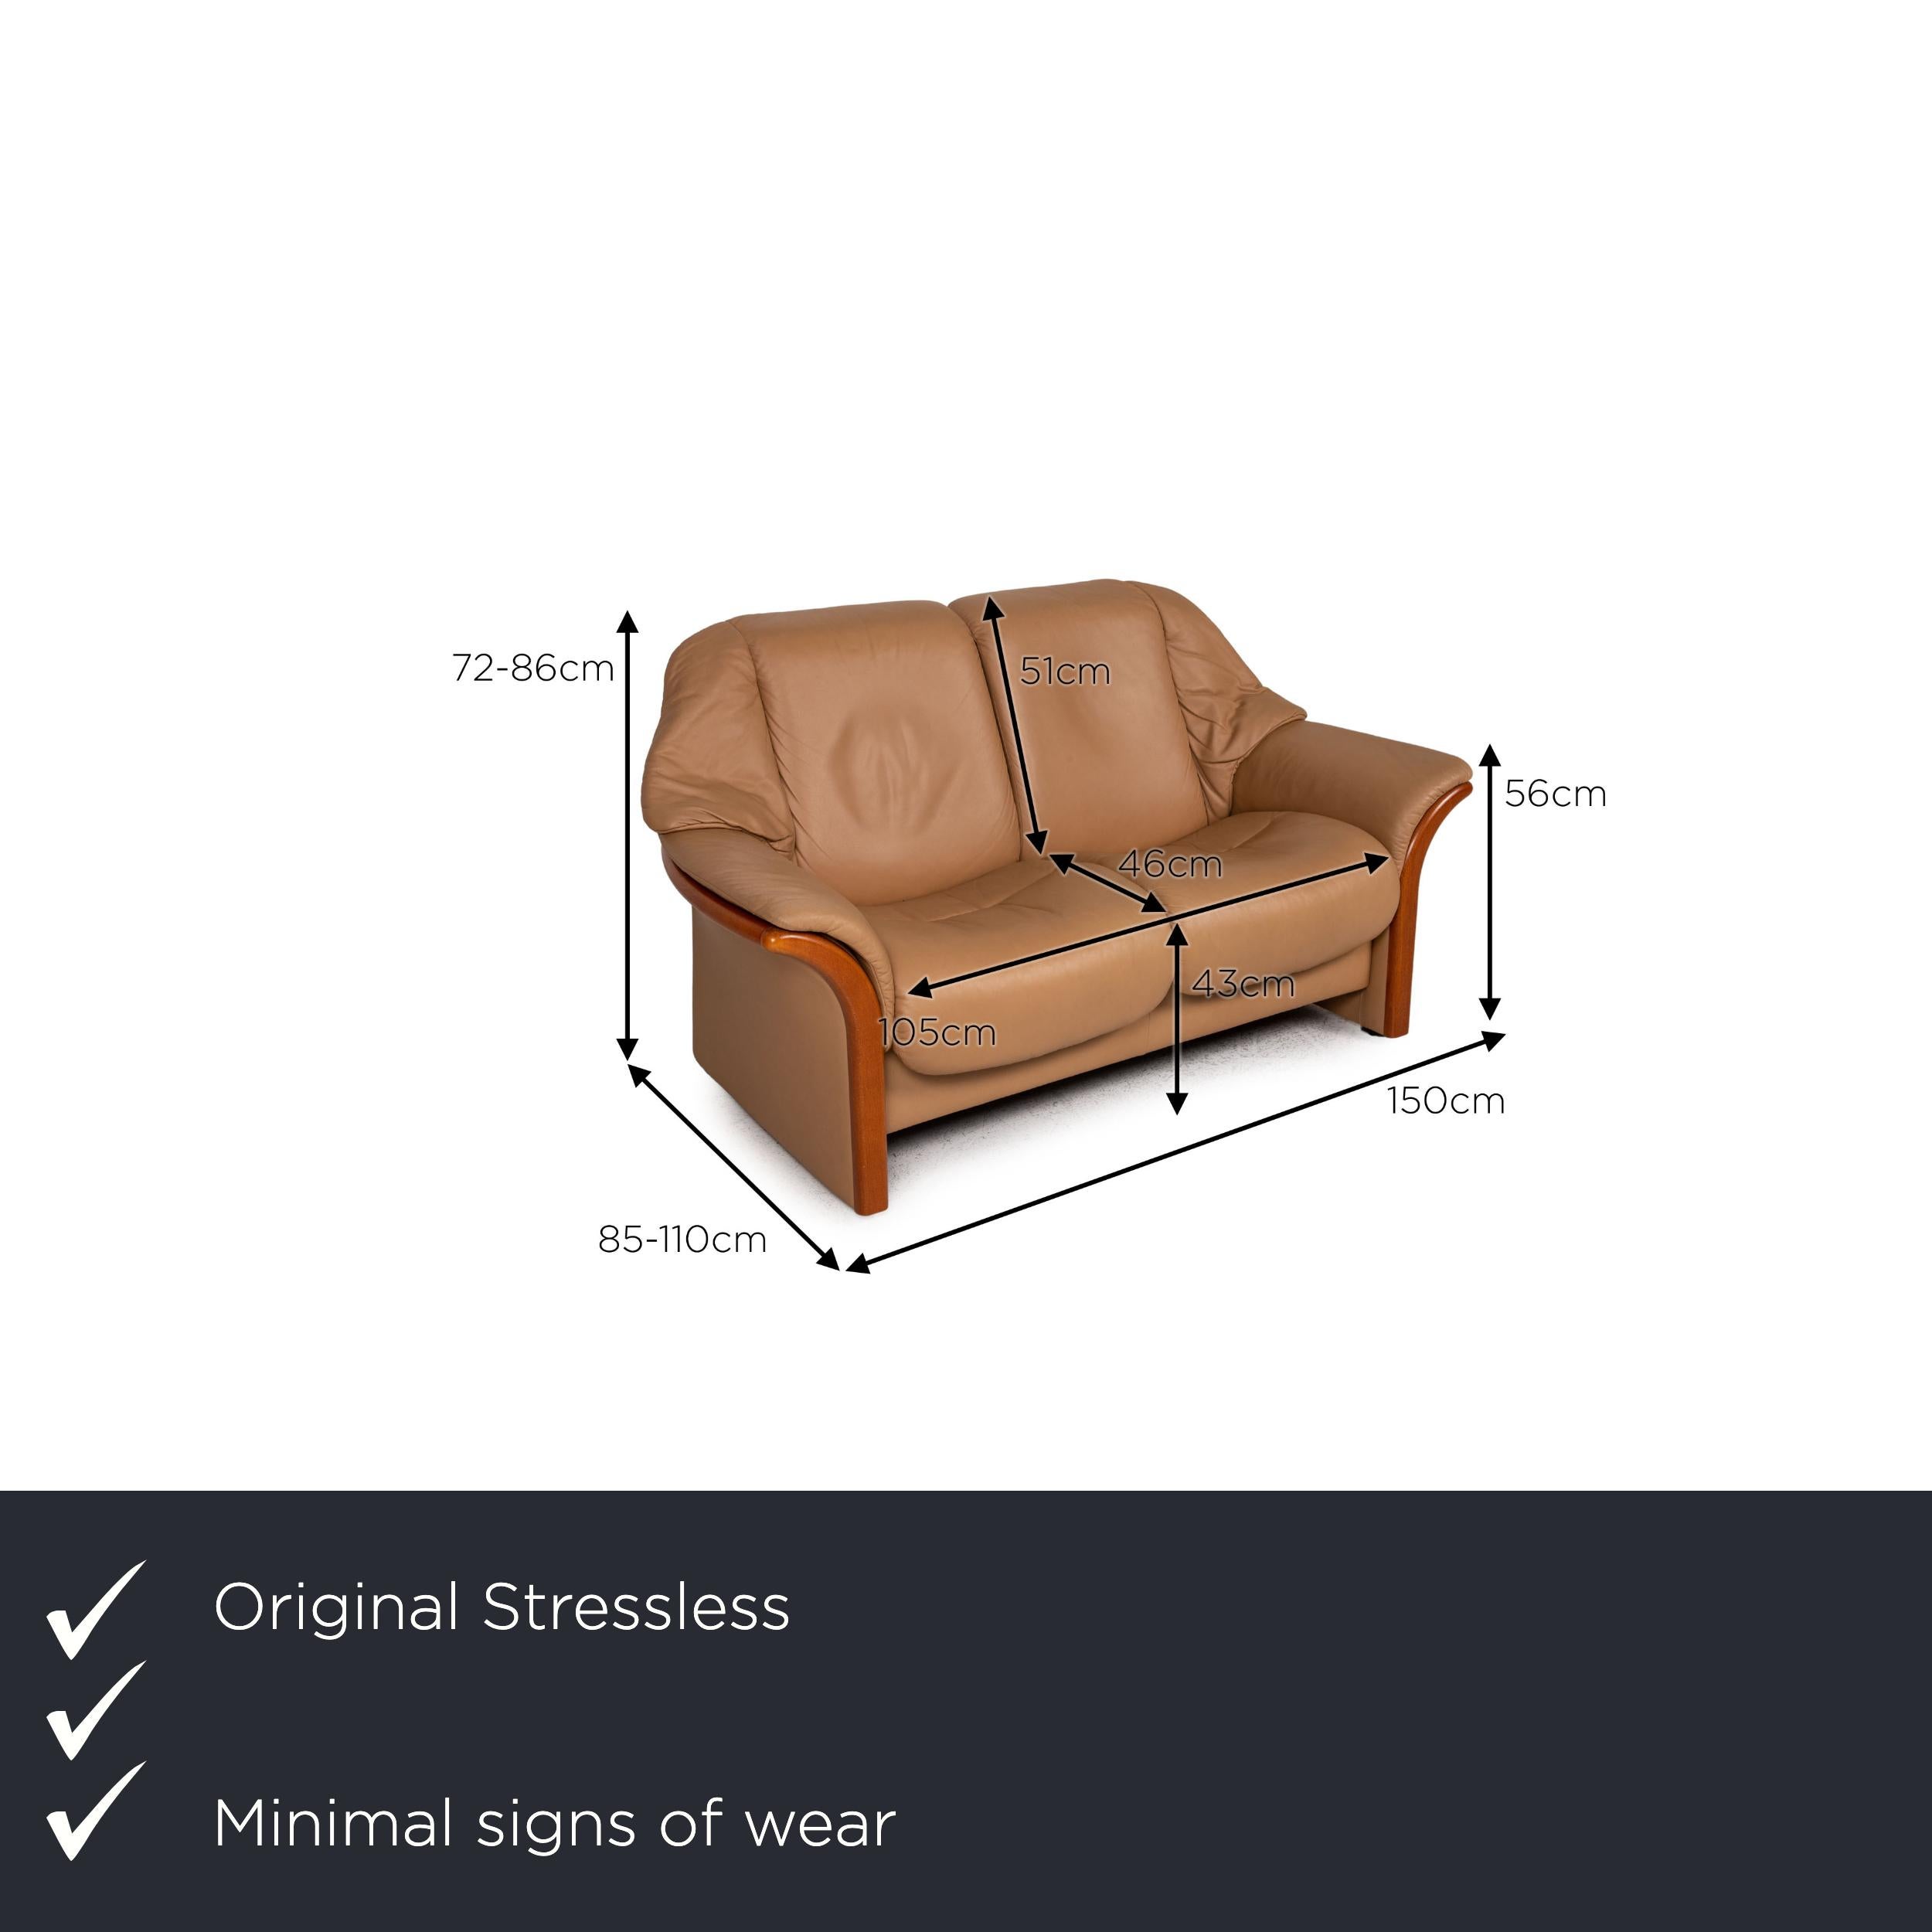 We present to you a Stressless Eldorado leather sofa beige two seater couch.

Product measurements in centimeters:

depth: 85
width: 150
height: 72
seat height: 43
rest height: 56
seat depth: 46
seat width: 105
back height: 51.

 